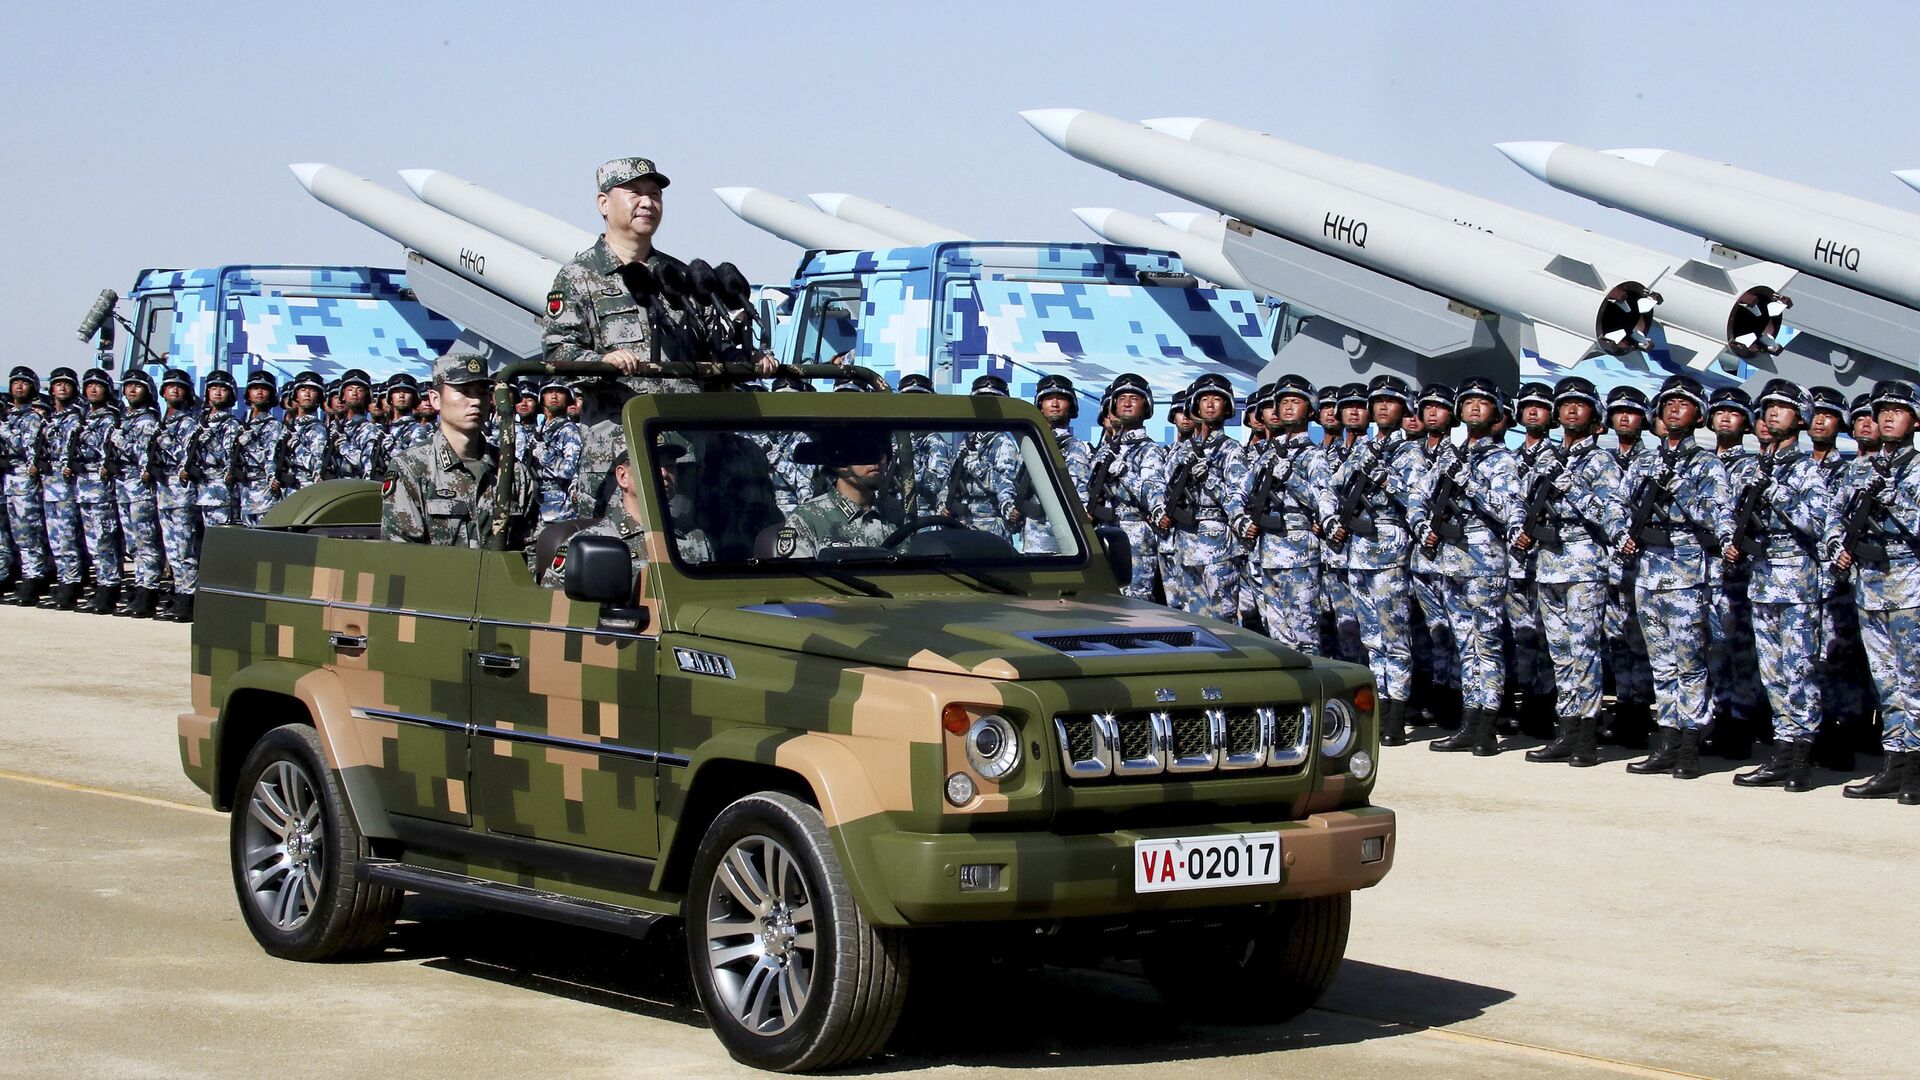 In this photo released by Xinhua News Agency, Chinese President Xi Jinping stands on a military jeep as he inspects troops of the People's Liberation Army during a military parade to commemorate the 90th anniversary of the founding of the PLA at Zhurihe training base in north China's Inner Mongolia Autonomous Region, Sunday, July 30, 2017 - Sputnik Moldova, 1920, 26.06.2022